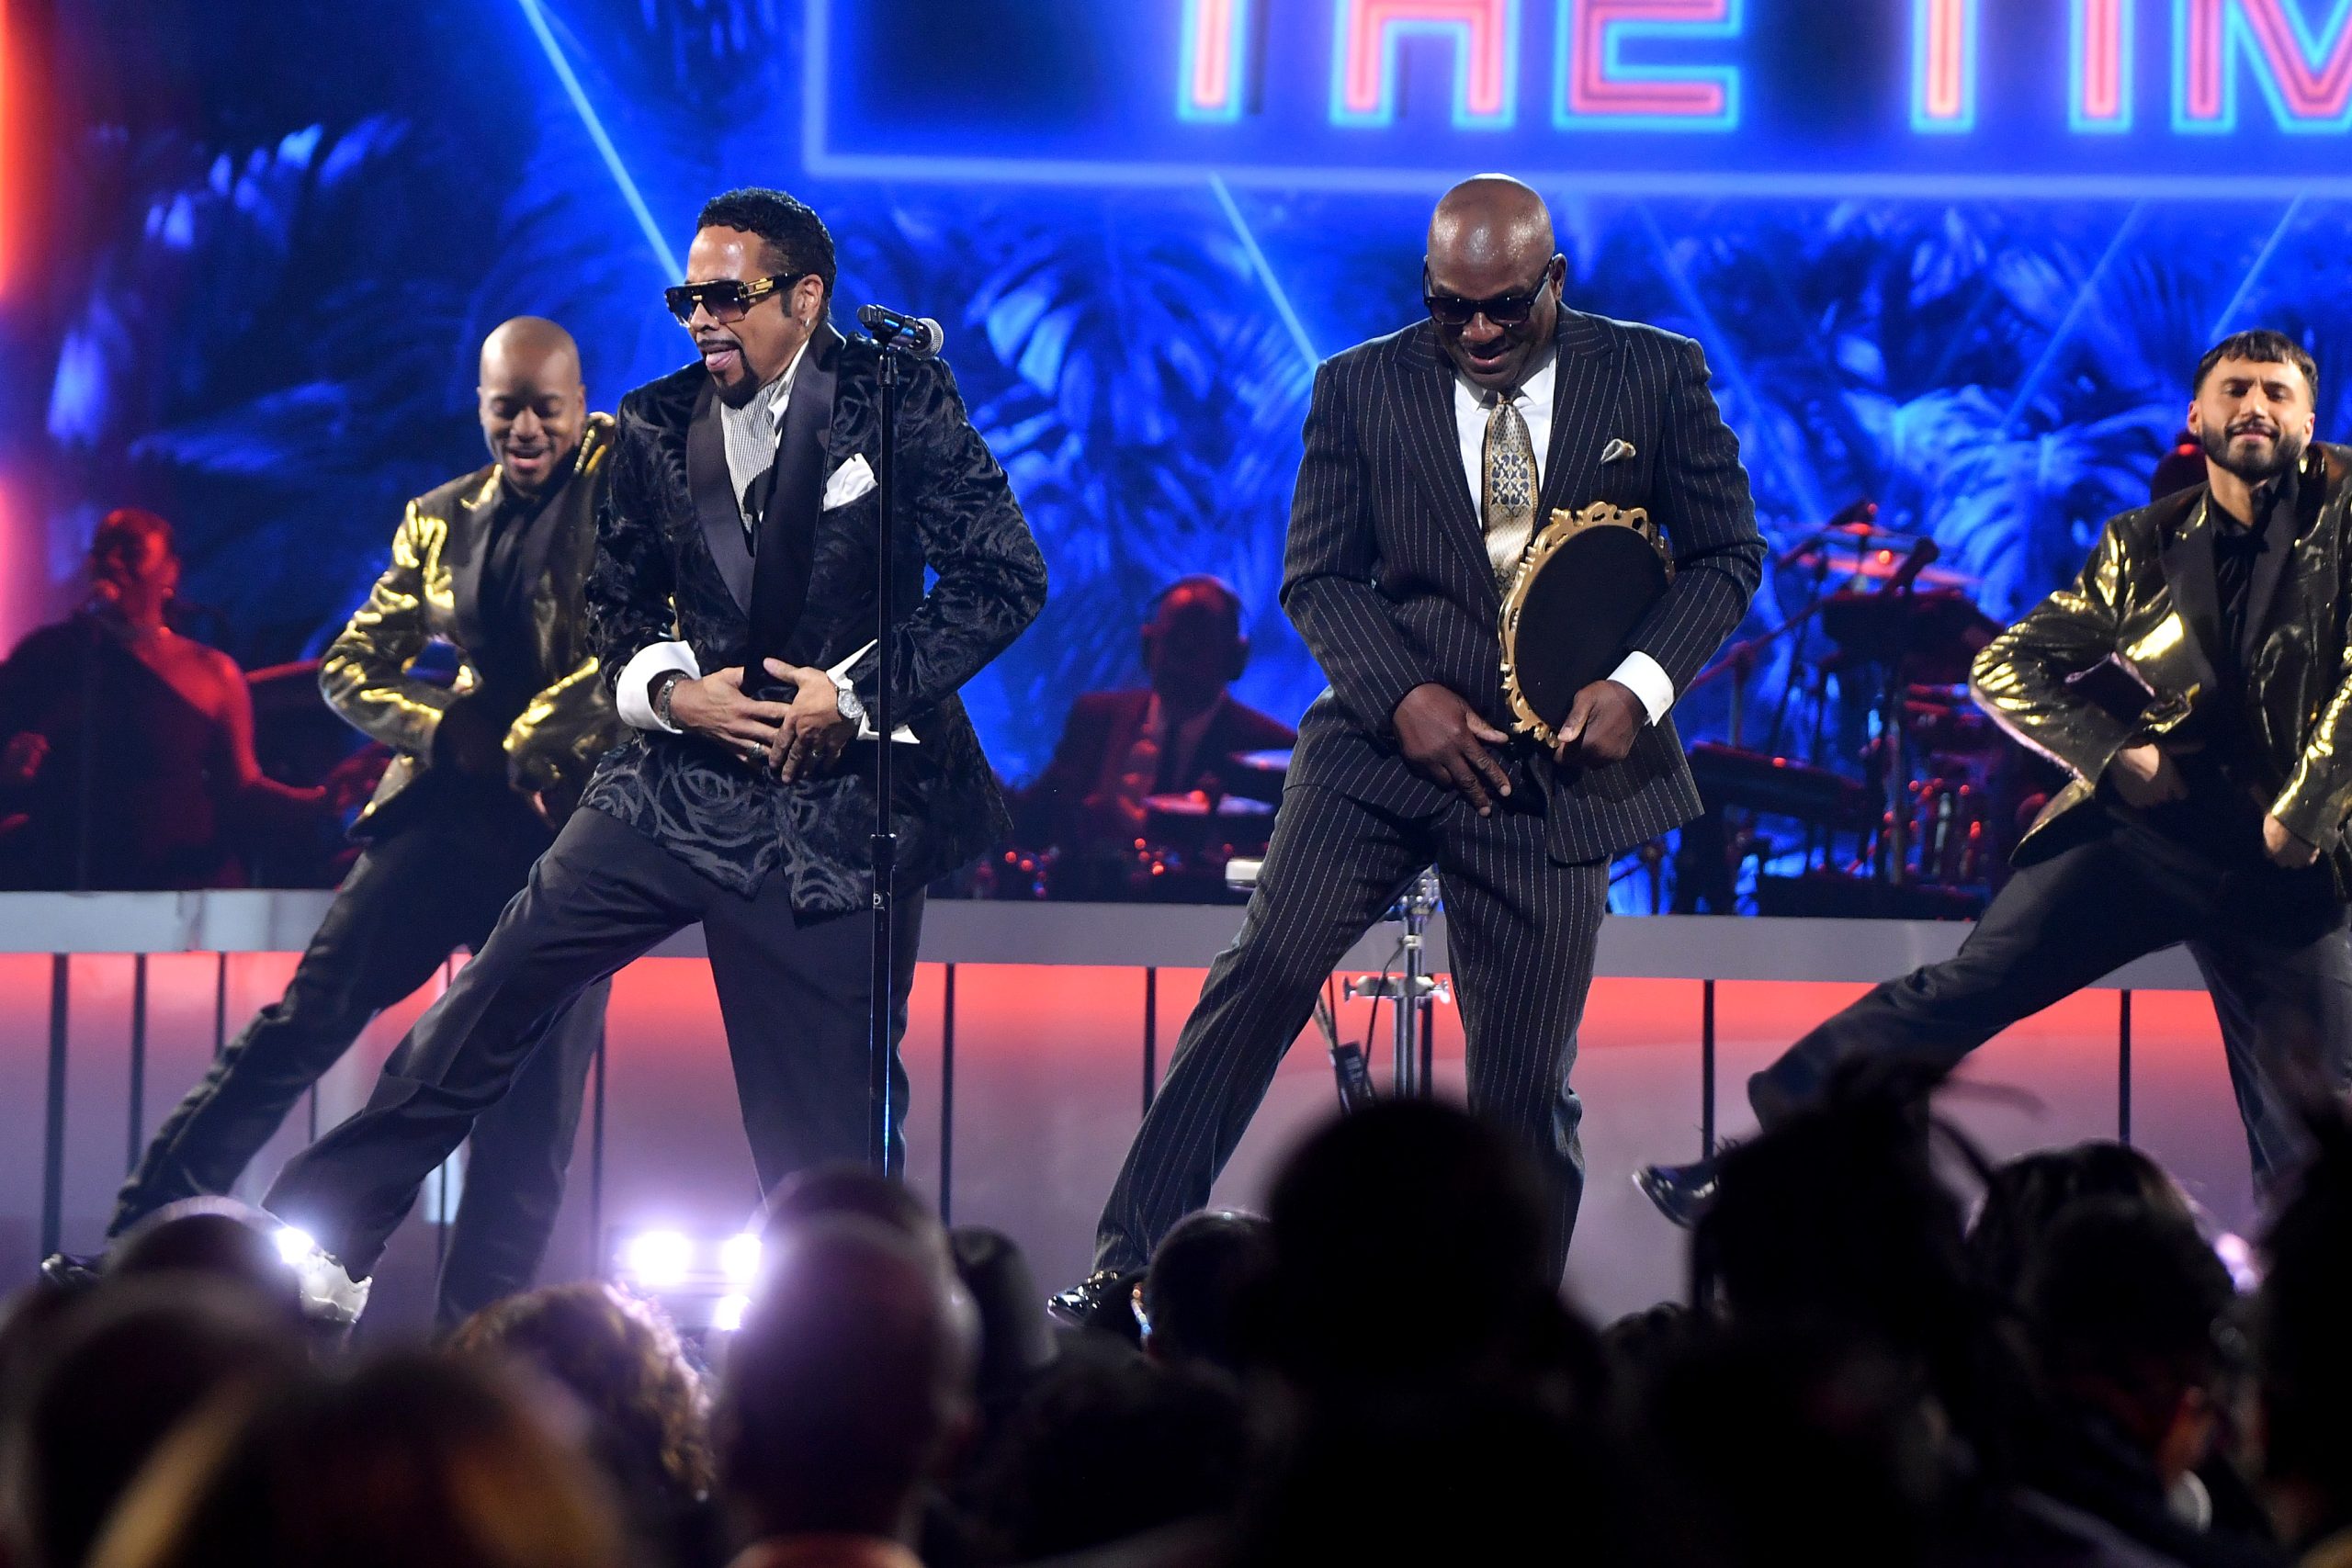 Night of Soul @soultrain on @bet Tune in Sunday Nov 26 8/7c to catch my  performance.